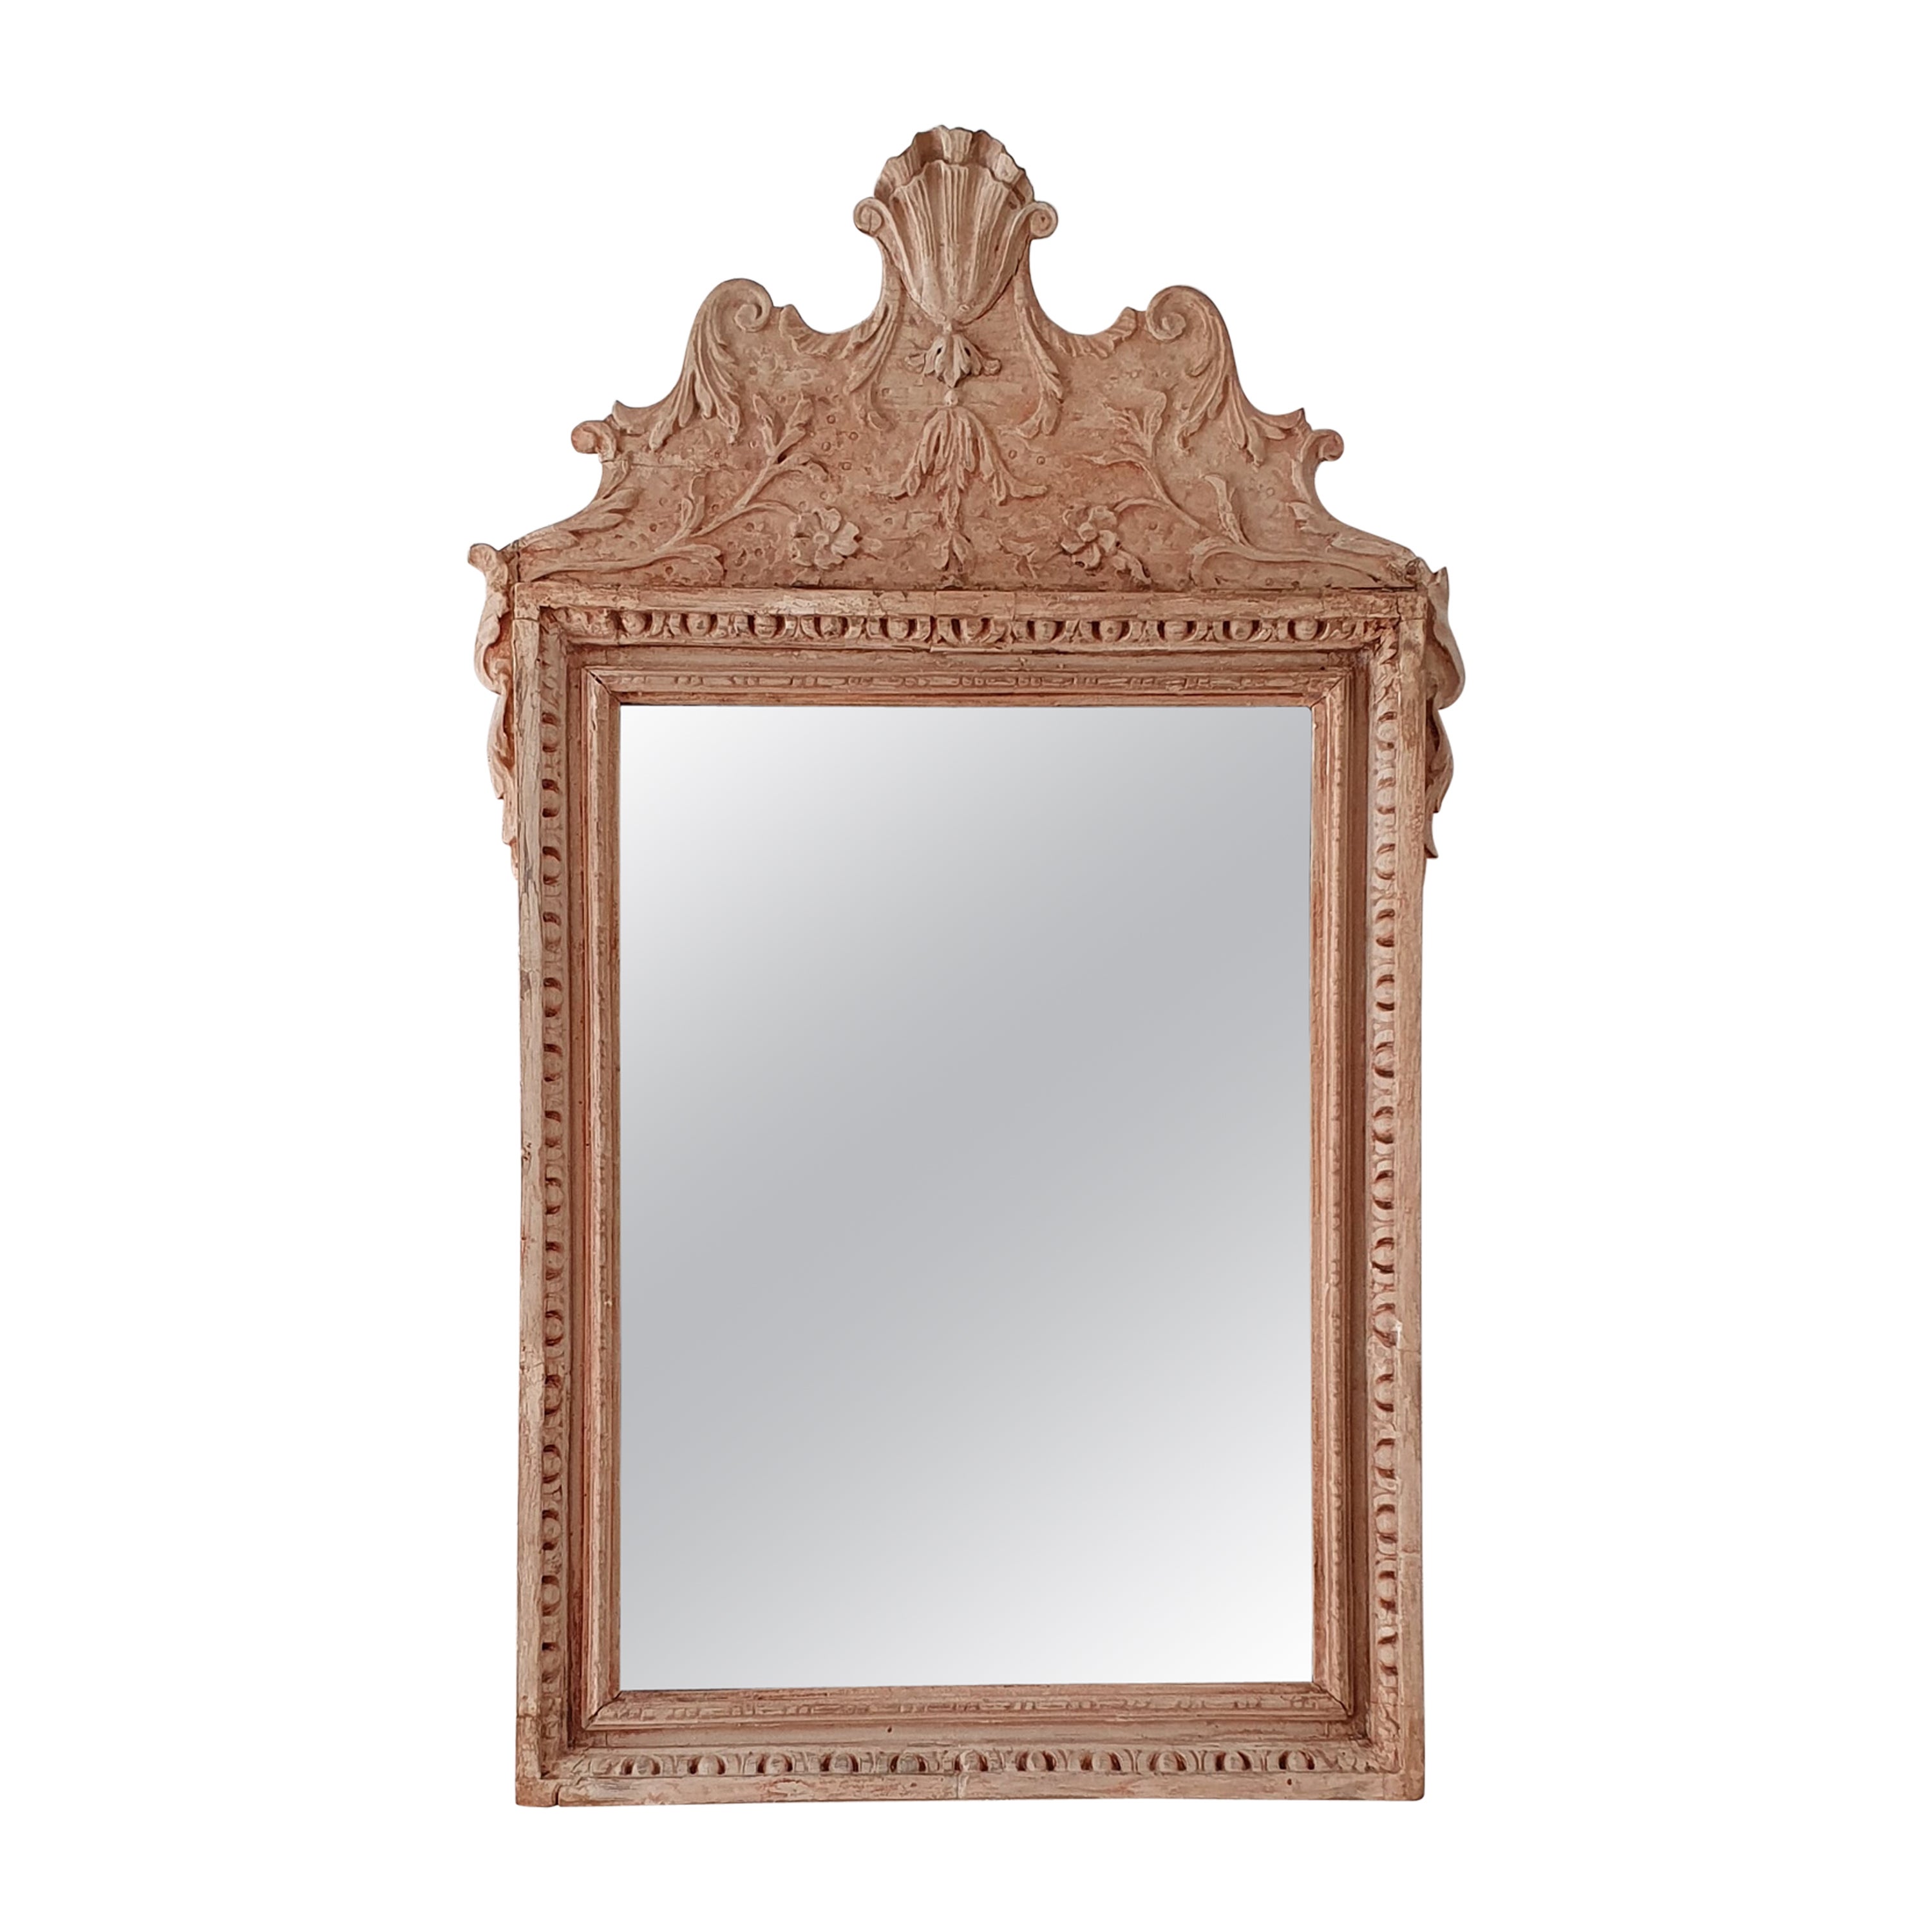 19th Century English Wall Mirror For Sale